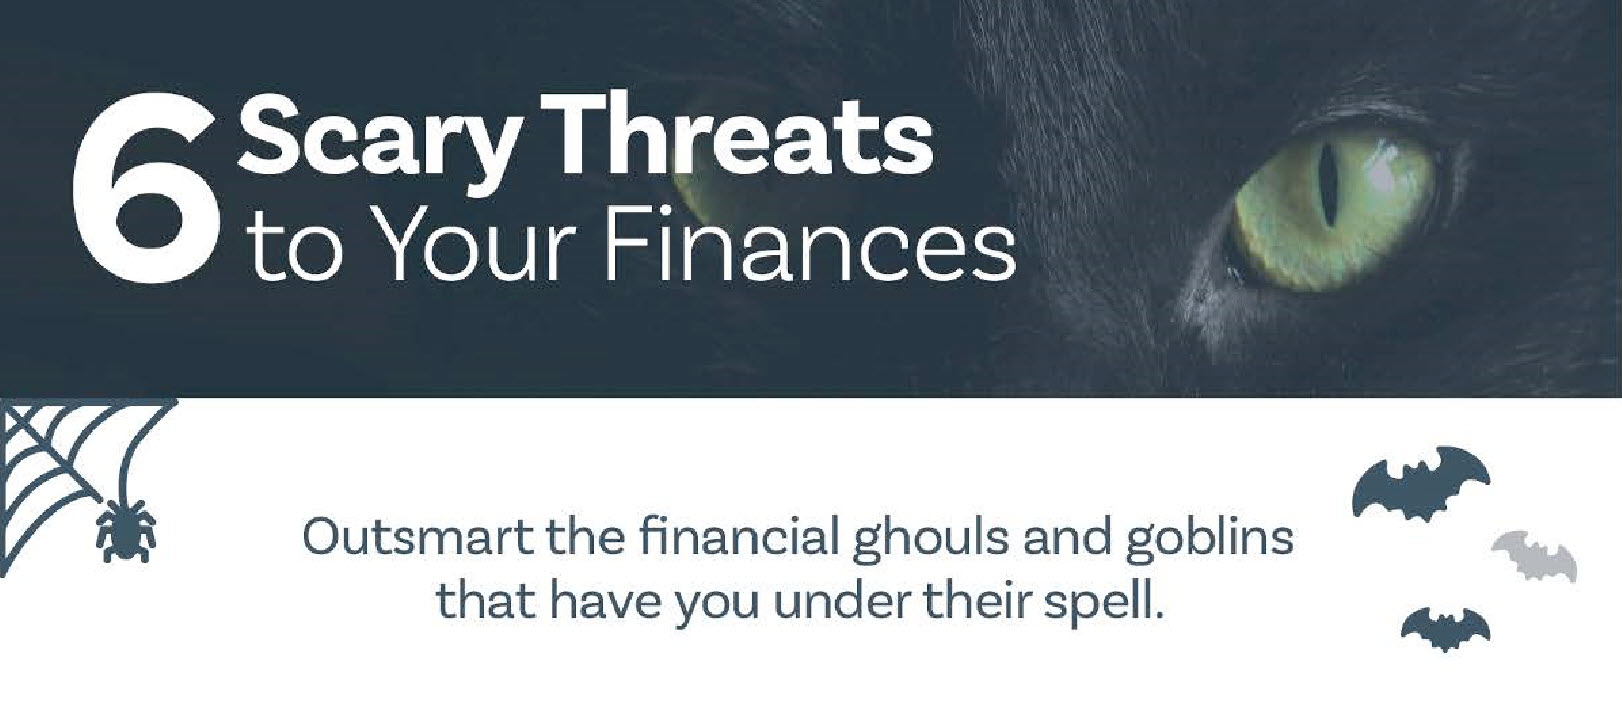 6 Scary Threats to Your Finances